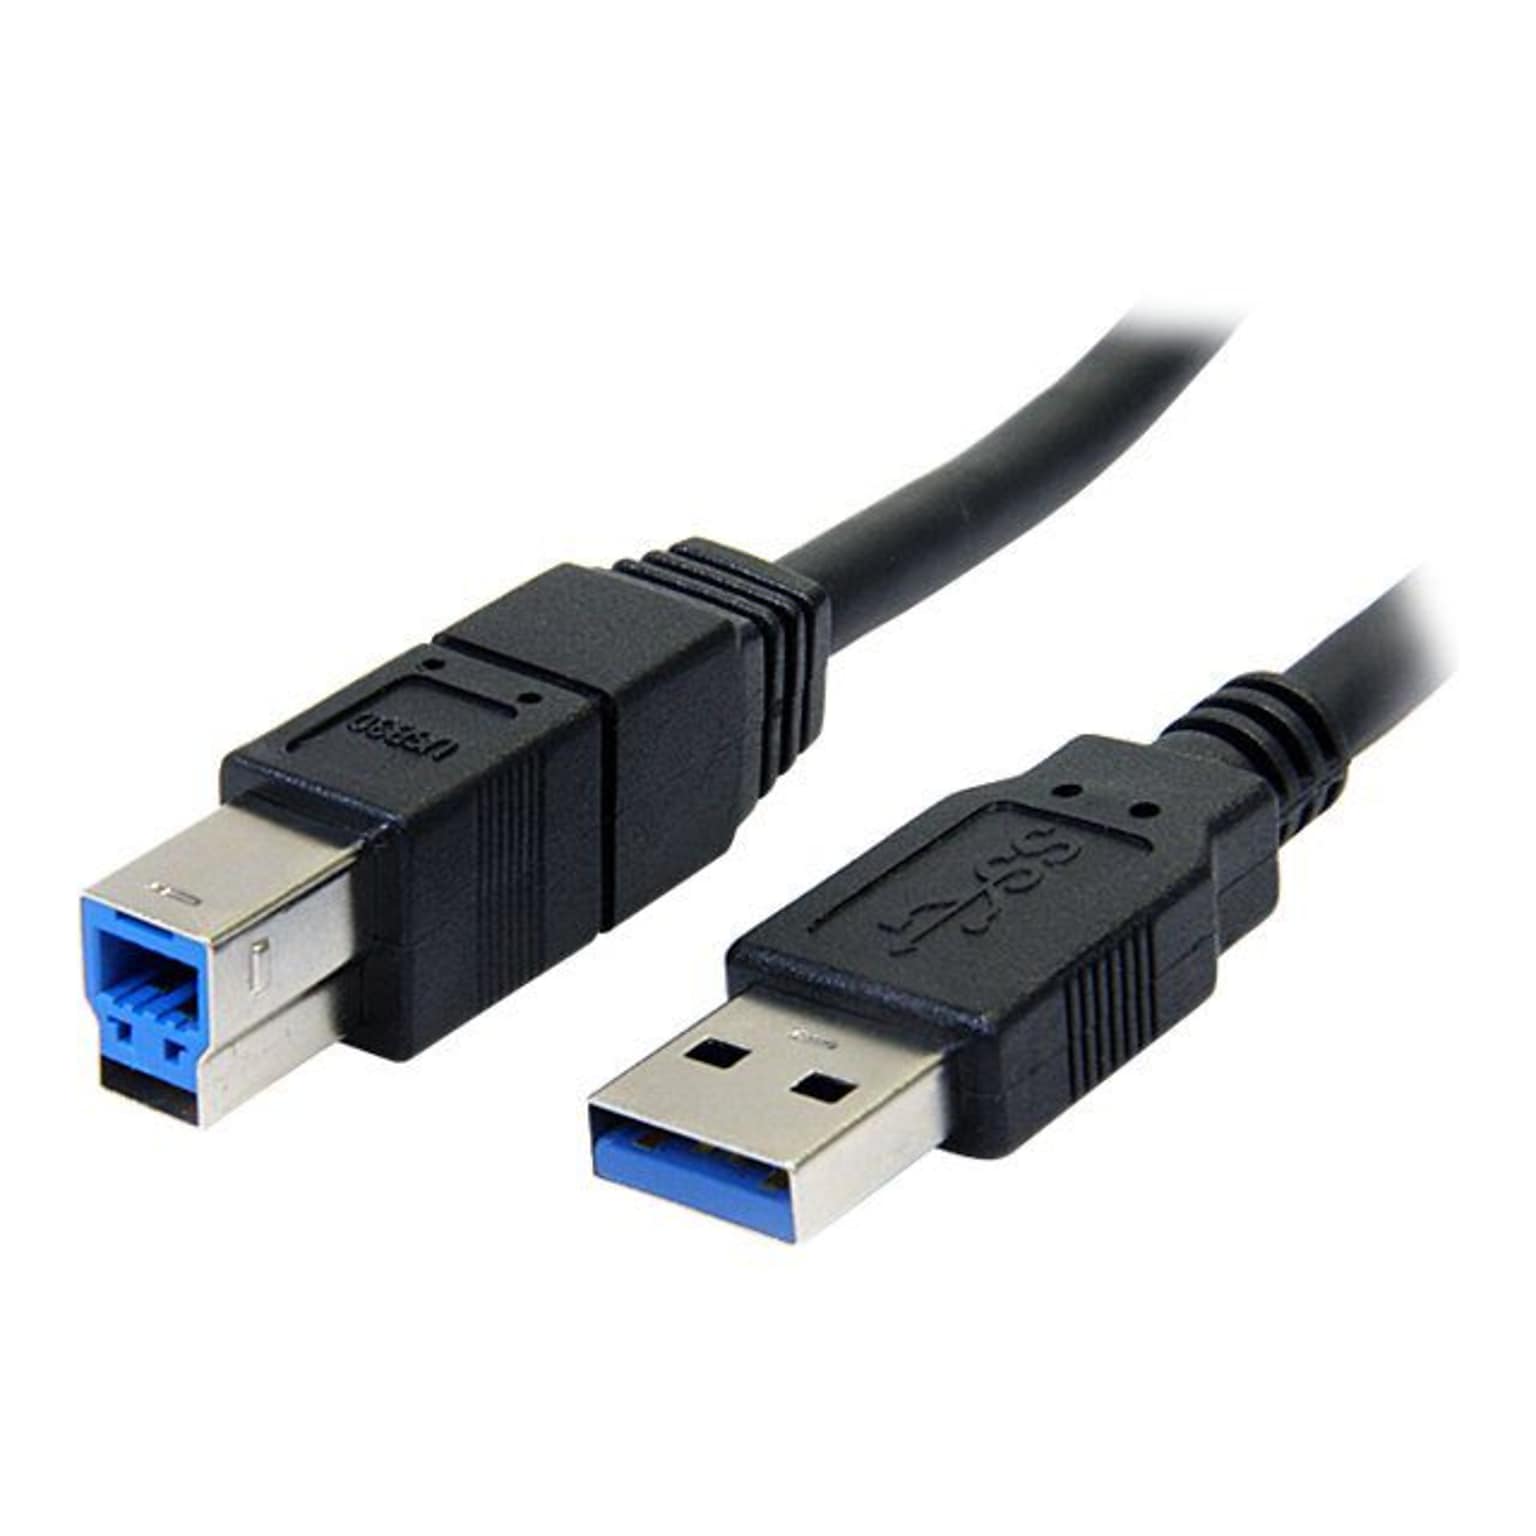 StarTech® 10 Superspeed USB 3.0 Type A Male To Type B Male Cable; Black